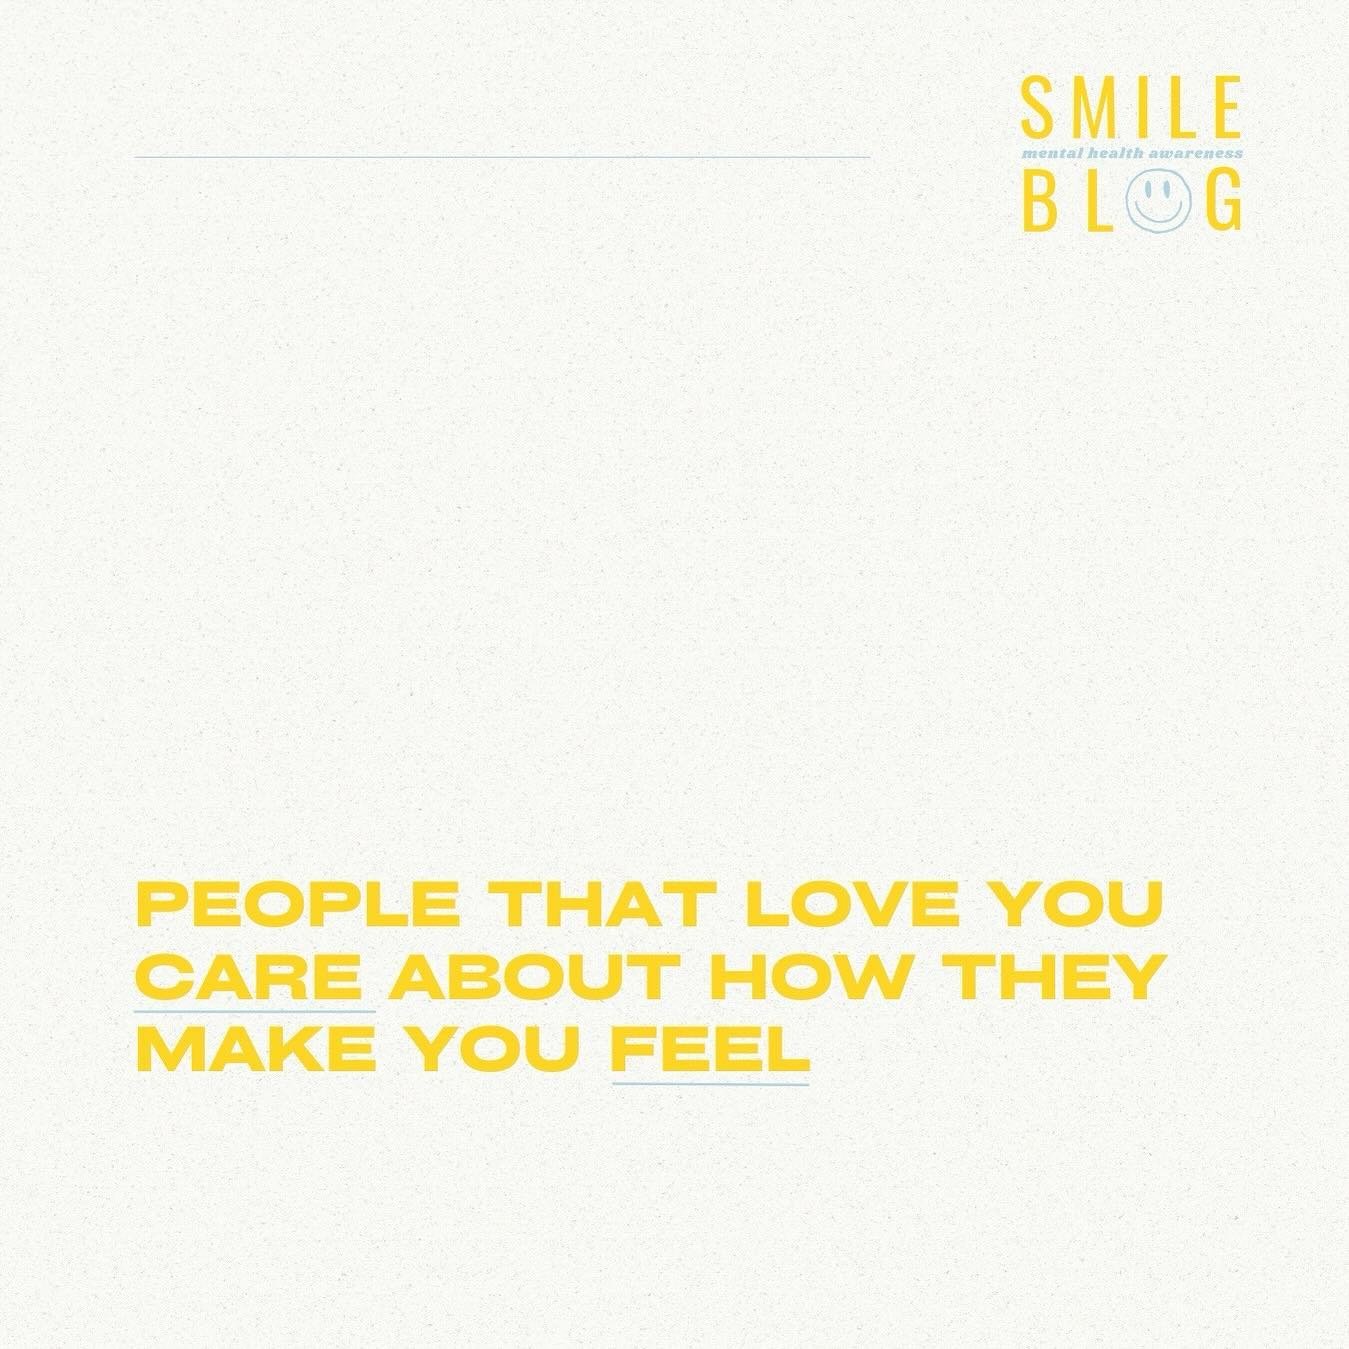 A reminder that people who truly love you CARE about how they make you feel. 

Have a great day⚡️🩵😁 
.
.
.
.
.
Want to learn more about us? Check us out @ mhsmileblog.com. Link is in bio

#selfcare #awareness #mentalhealthawareness #mentalhealthmat